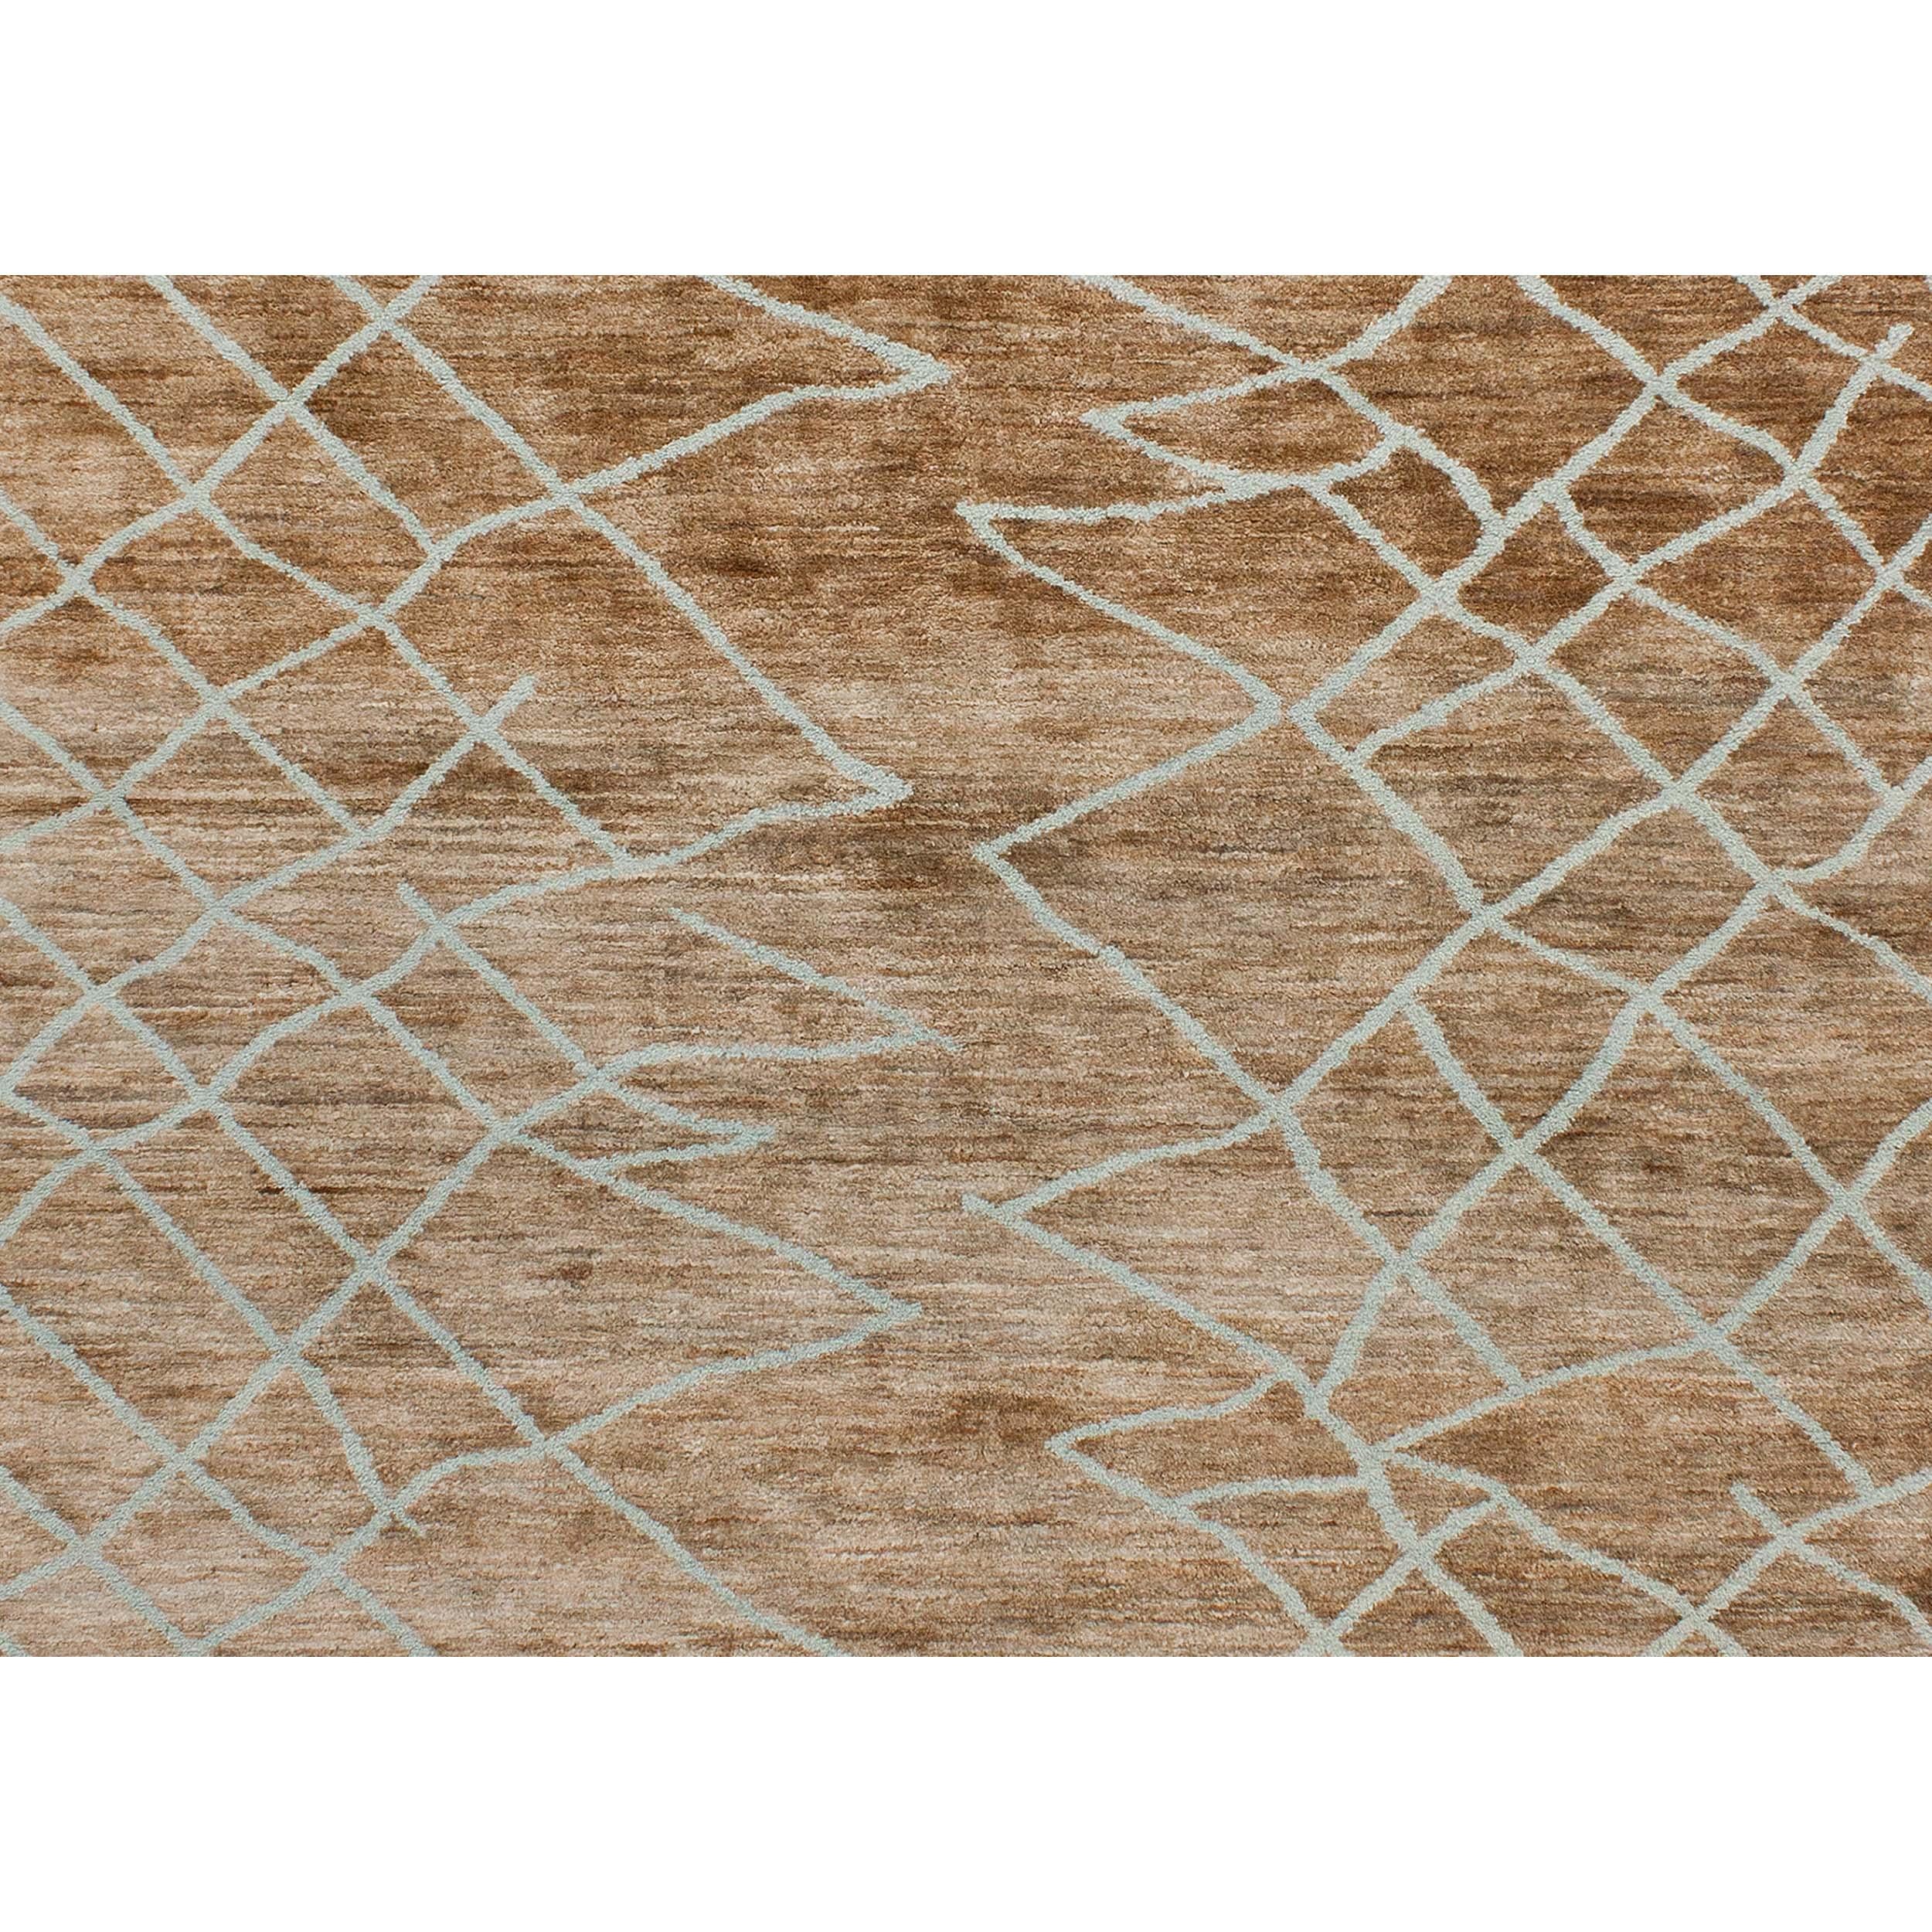 Luxurious modern hand-knotted rug with our meticulously crafted masterpiece. This rug transcends their utilitarian purpose, becoming work of art that delight the senses and seamlessly harmonize with a variety of home decor styles. Meticulously